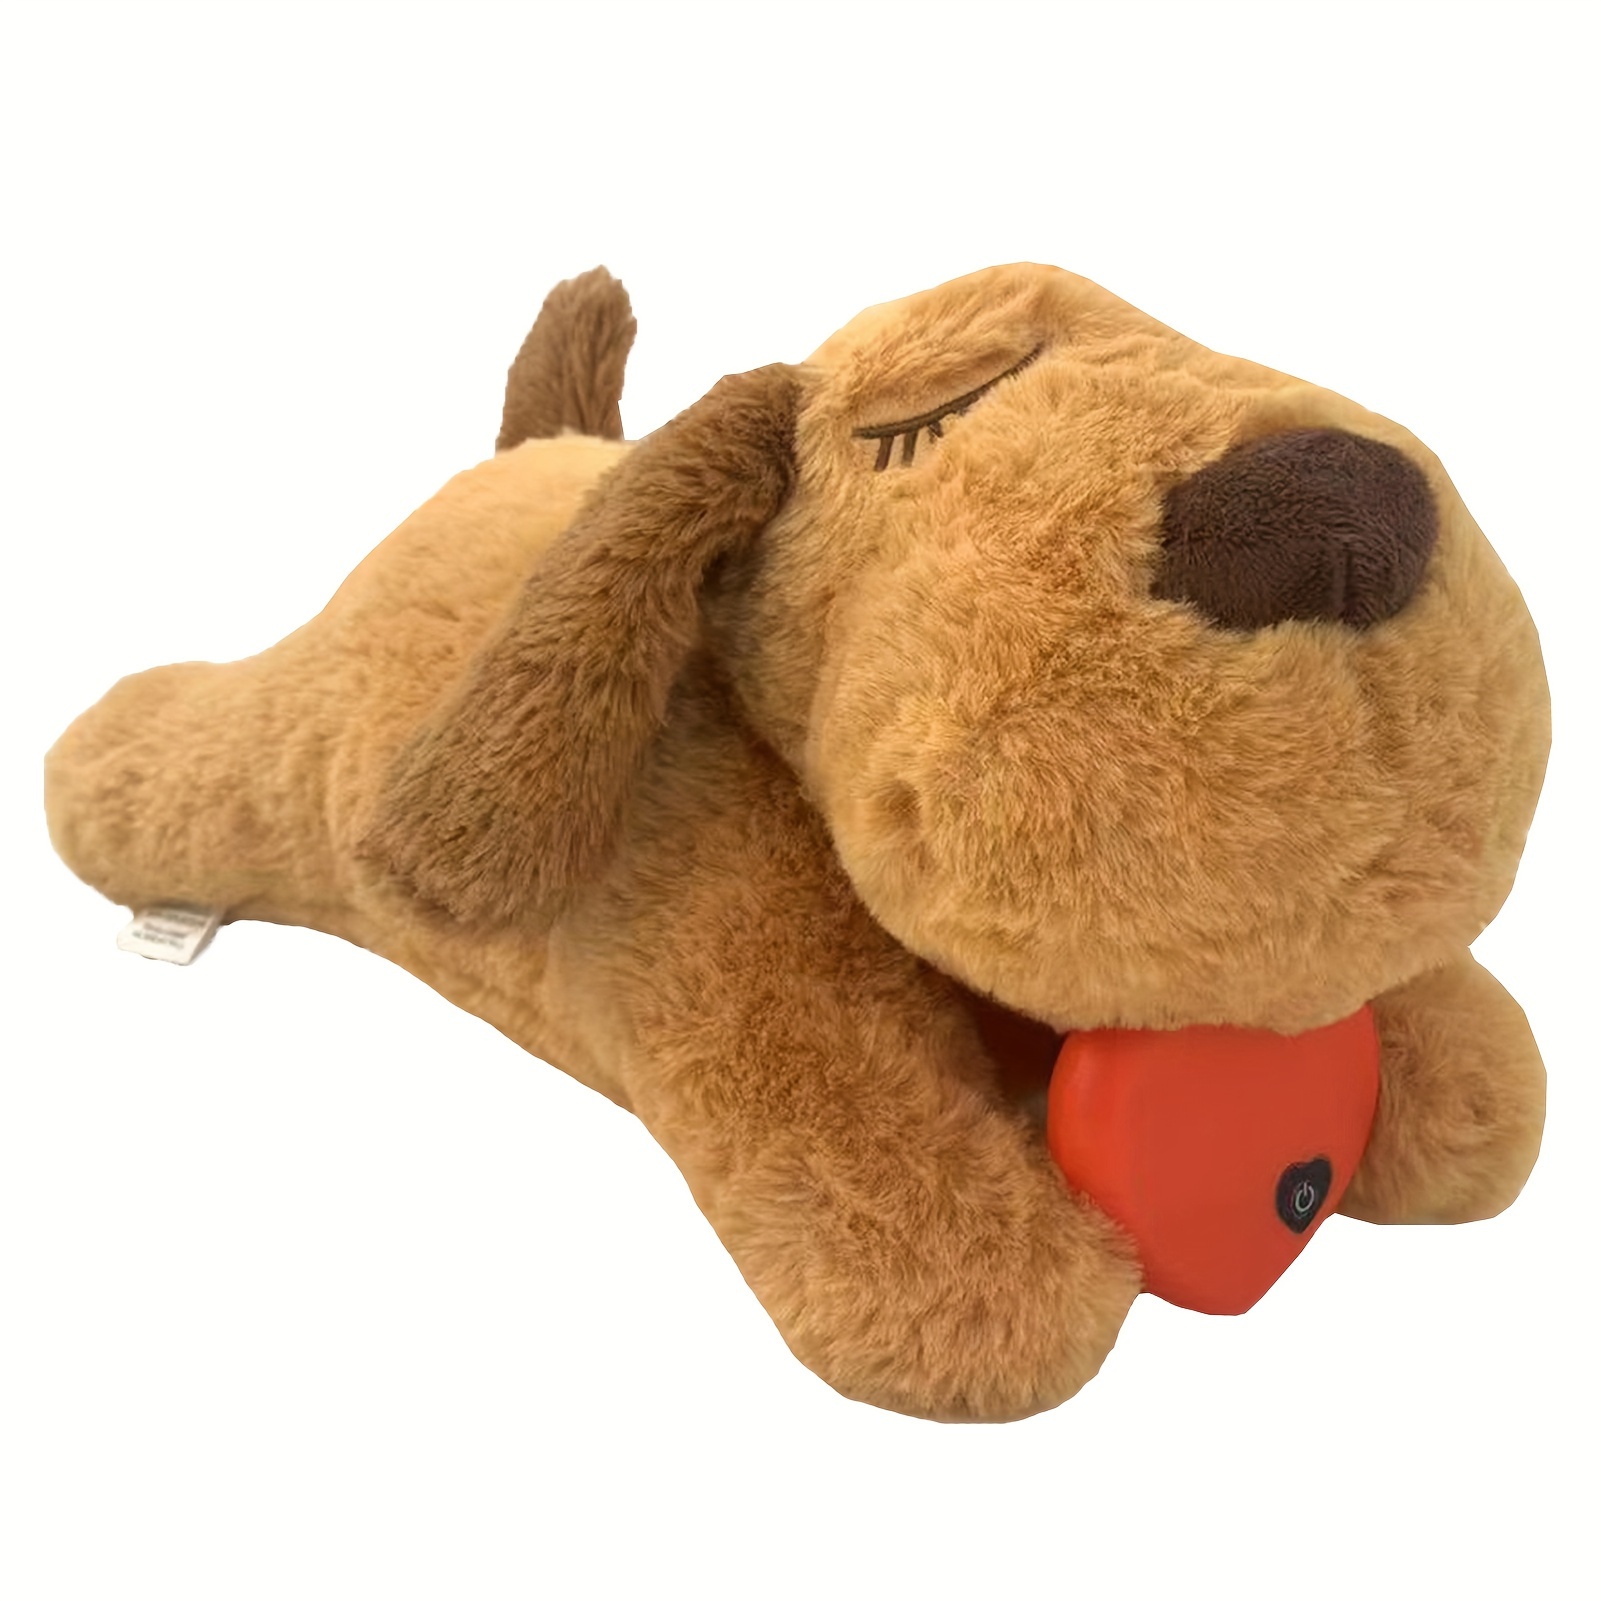 Heartbeat Puppy Comfort Cuddler Pillow for Dog Anxiety- Limited Time Offer